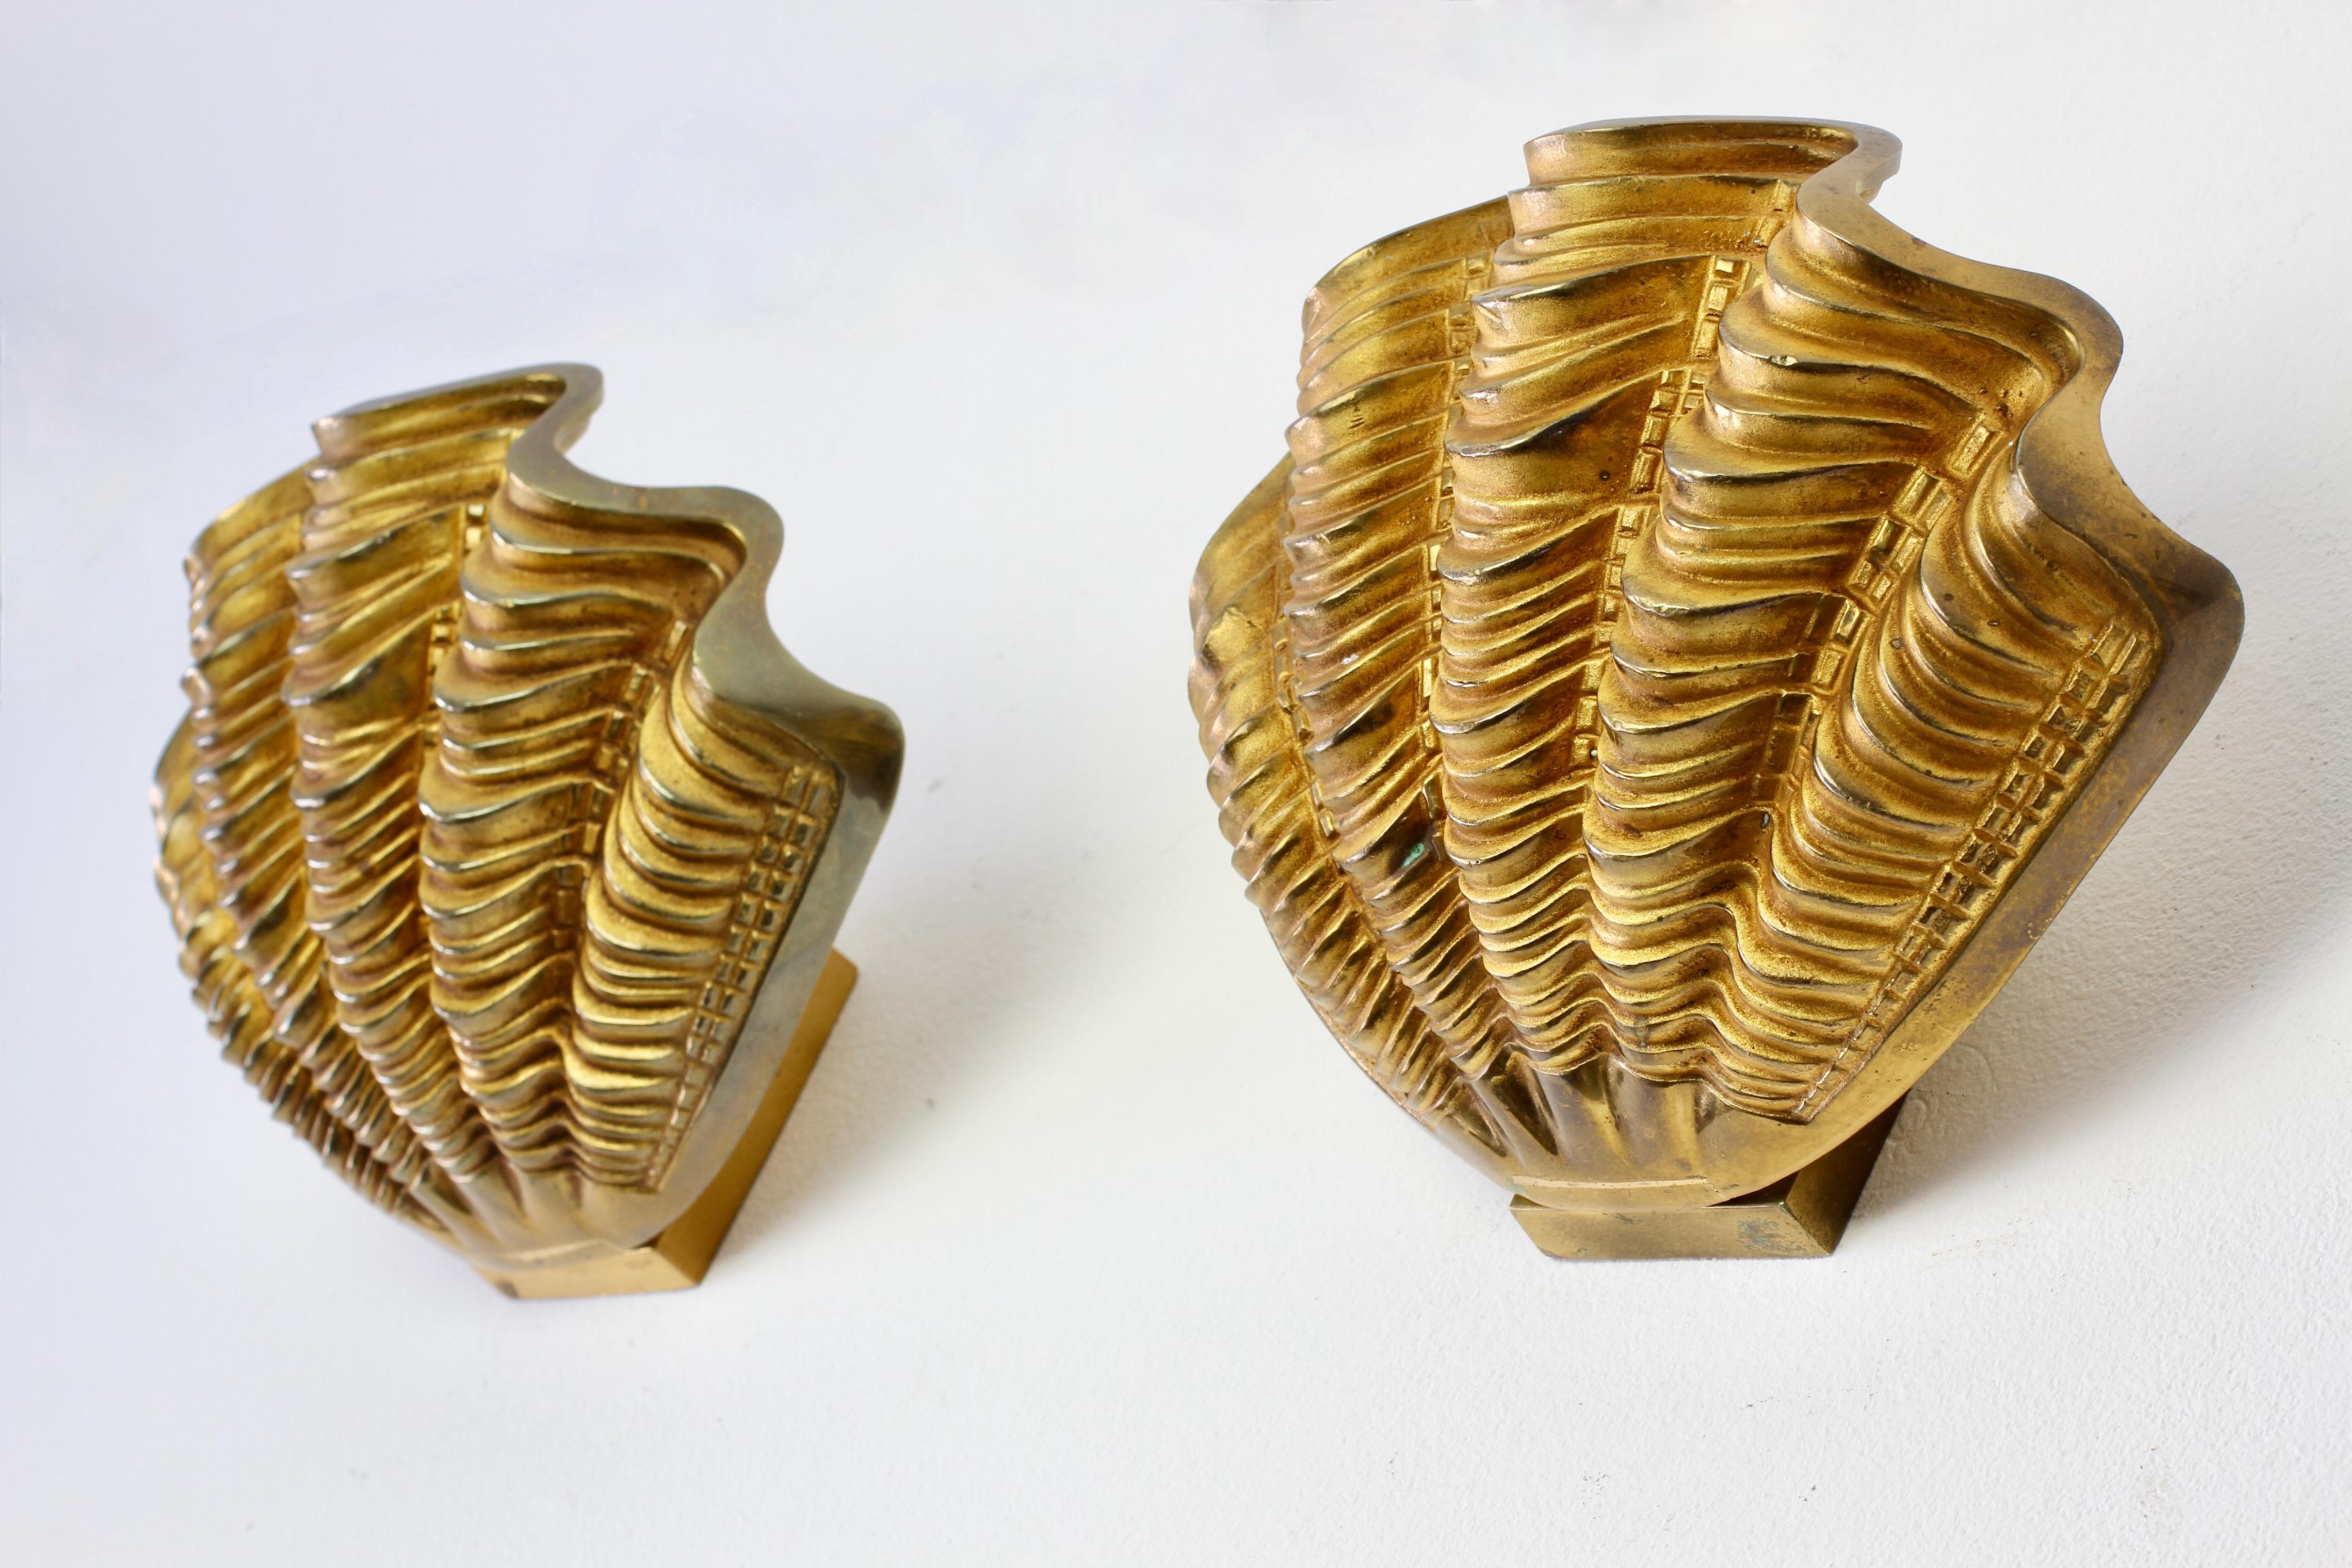 Stunning large pair of mid-century wall-mounted sconces in the style of Maison Charles, France, circa 1970s. In the shape of giant fluted clamshells and made of cast bronze, these are not dissimilar to lamps made by Maison Jansen. Perfect for the